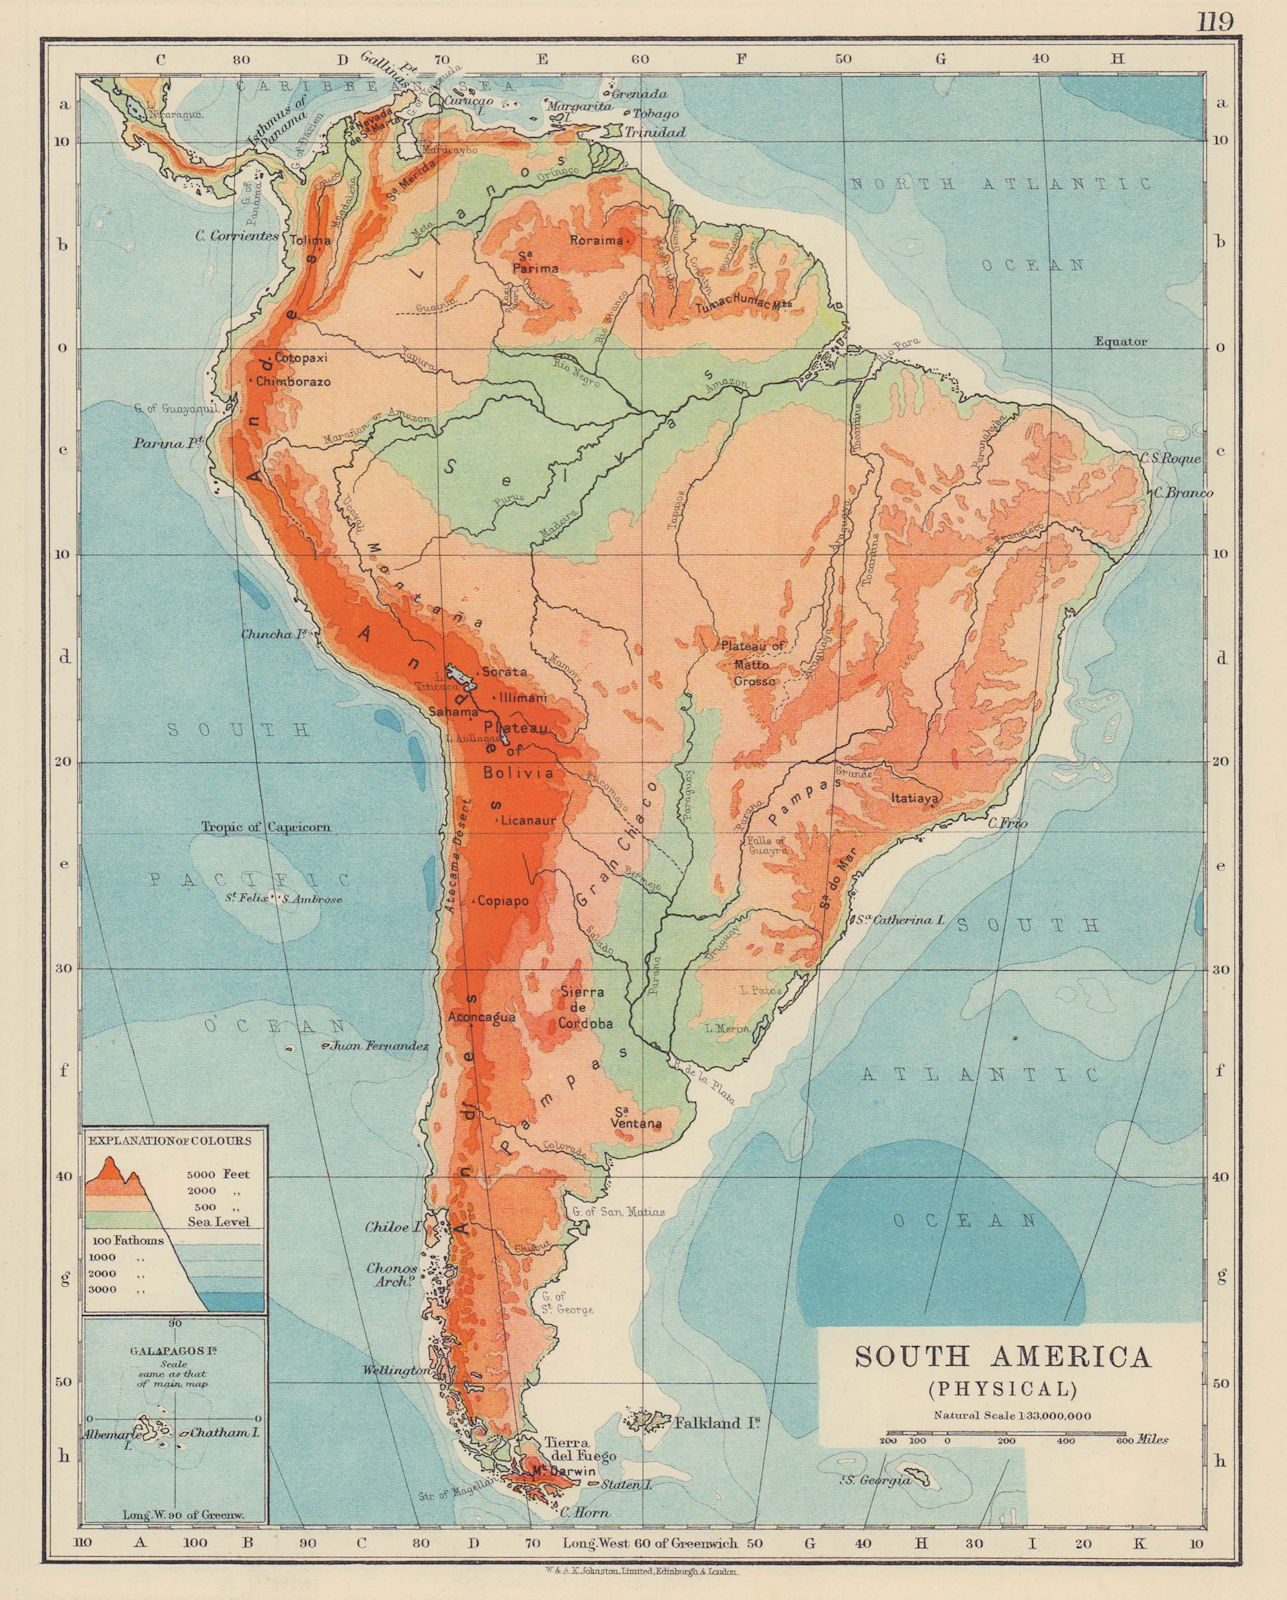 SOUTH AMERICA PHYSICAL. Andes Amazon basin. JOHNSTON 1910 old antique map